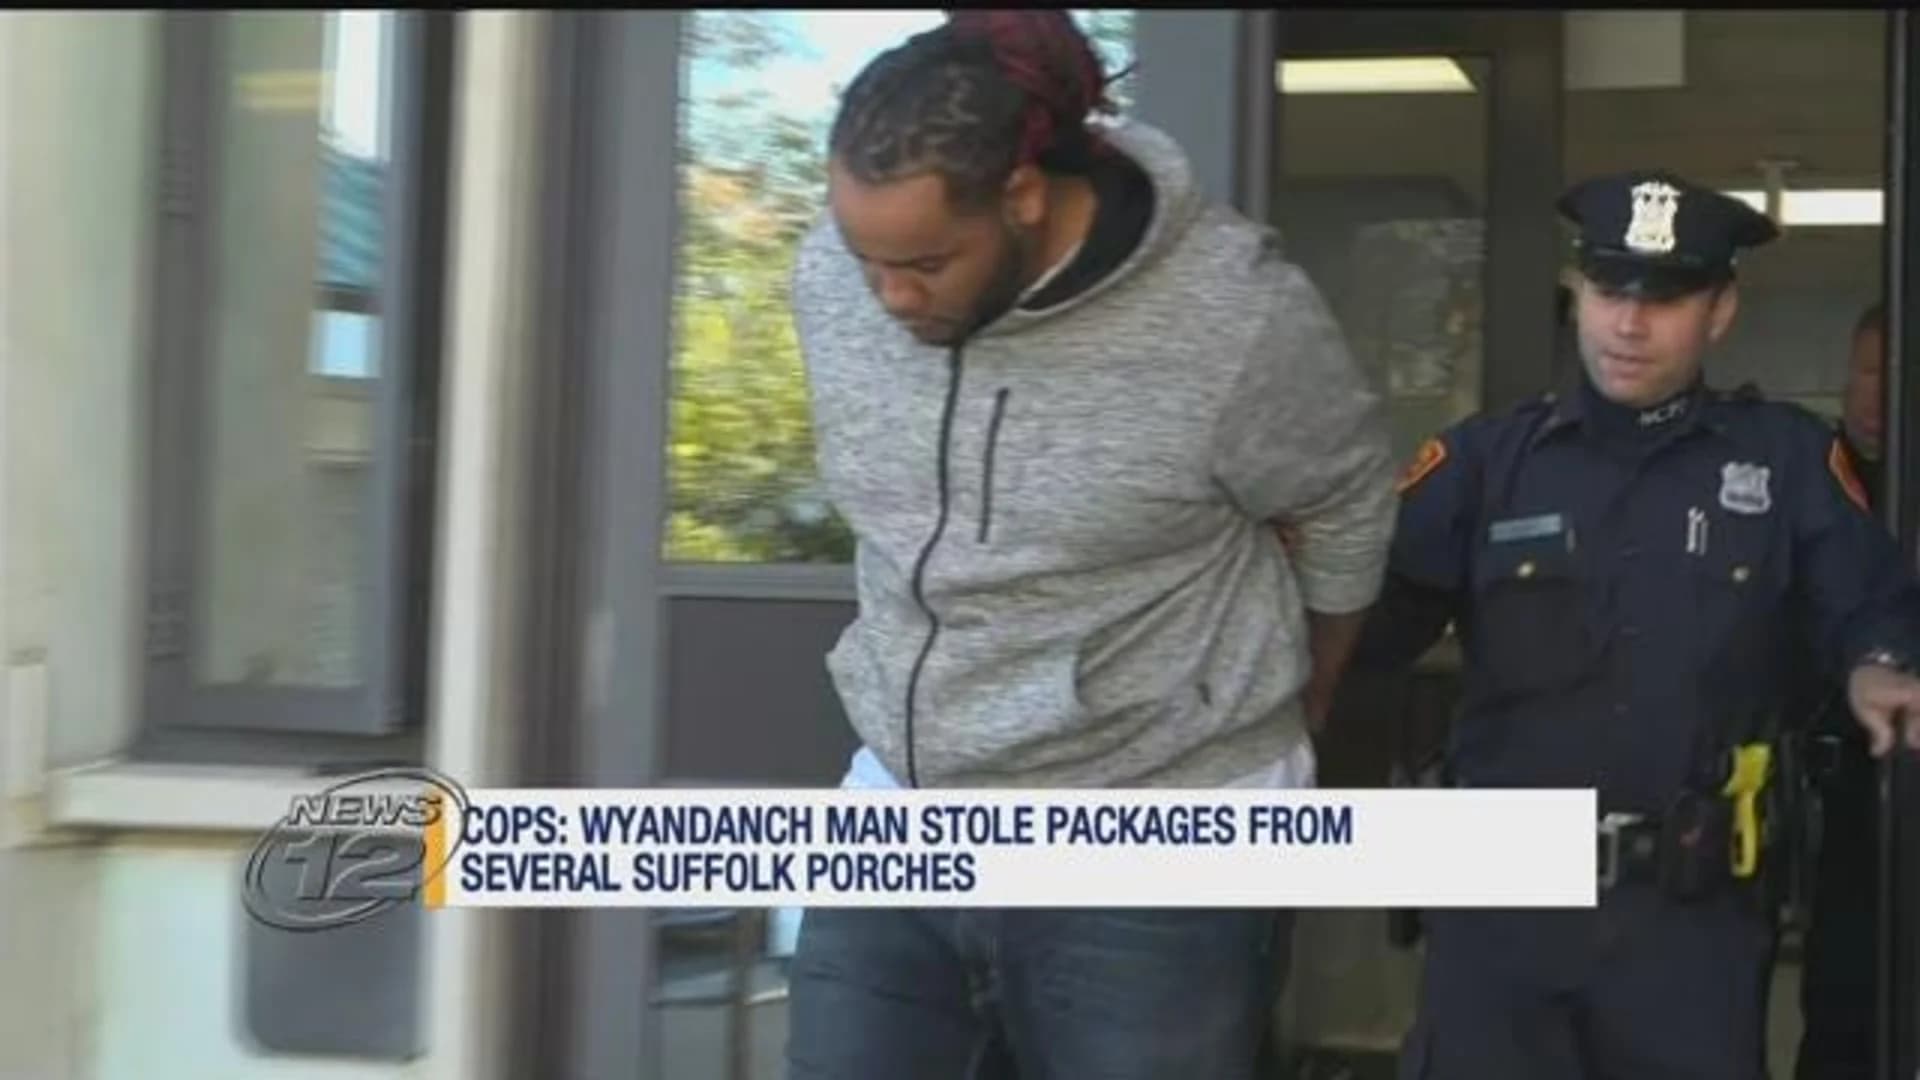 Man accused of stealing packages off porches of Suffolk homes